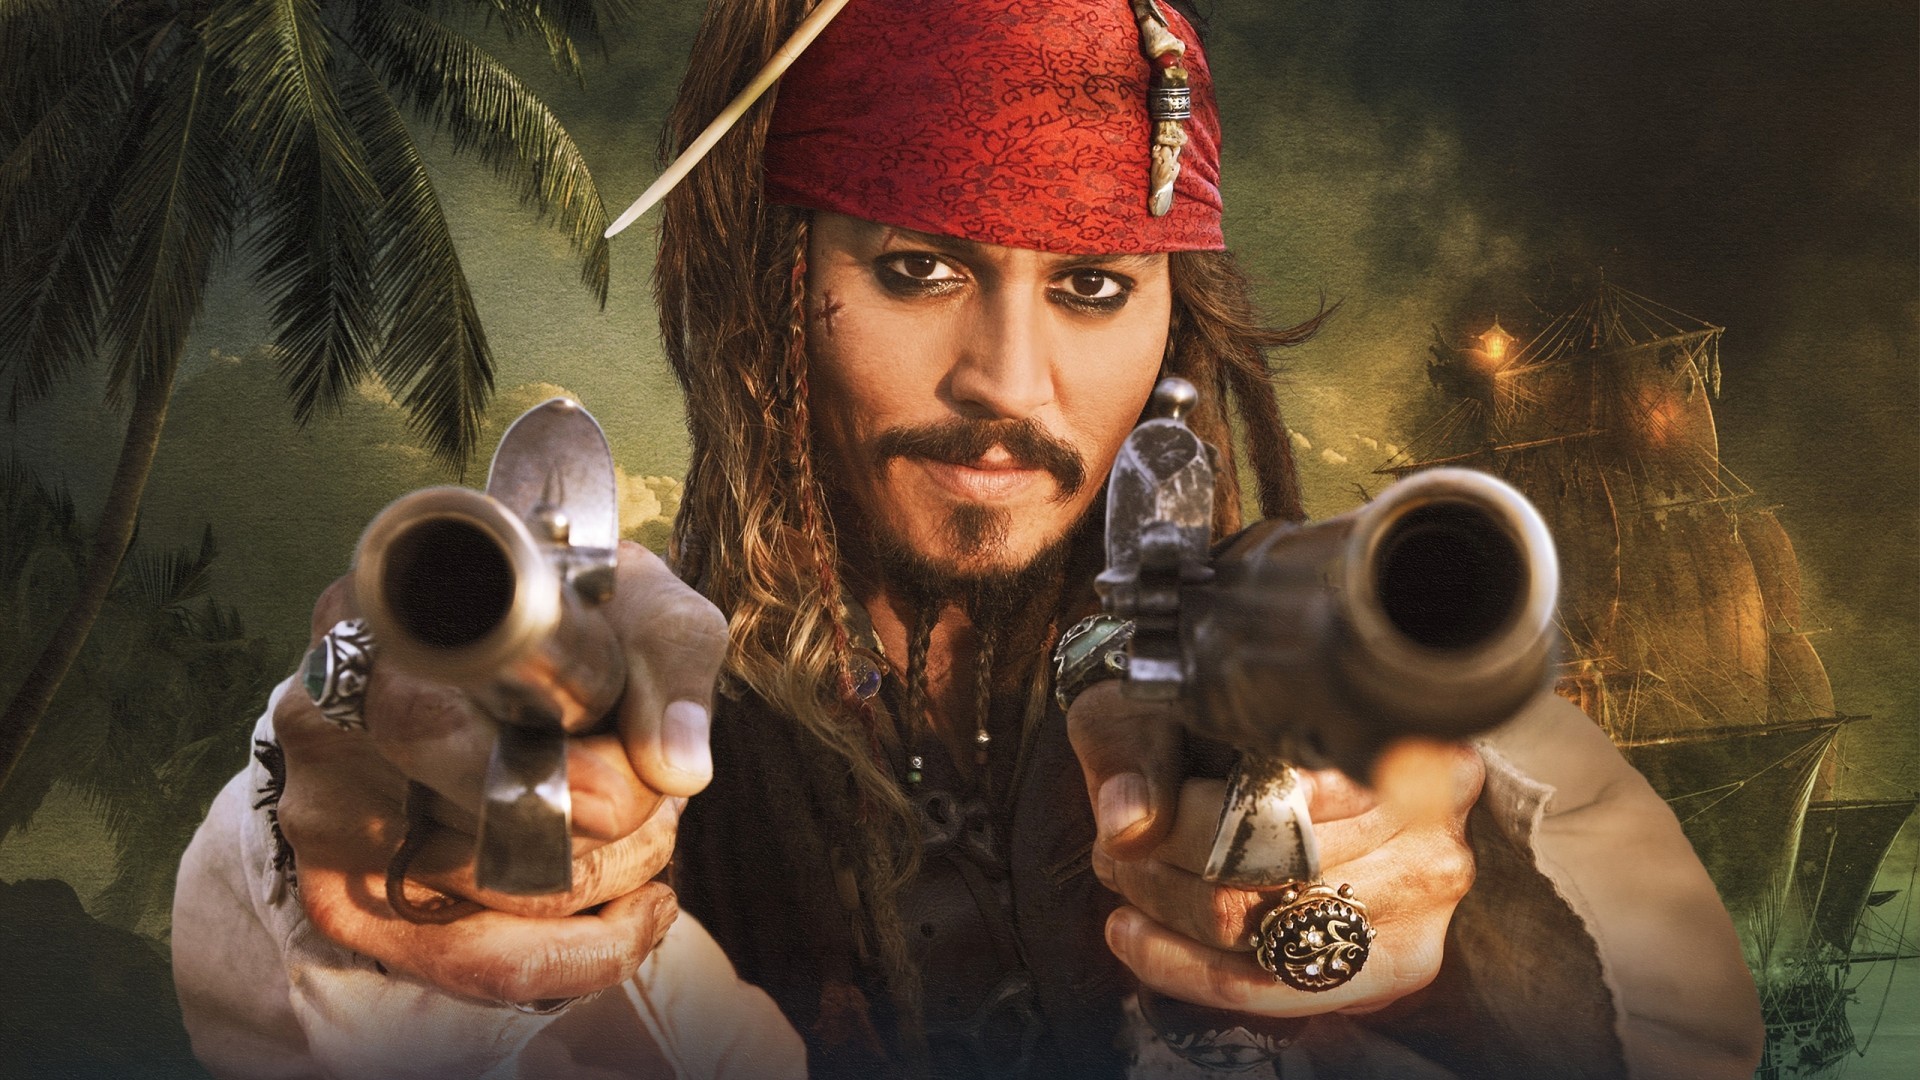 People 1920x1080 Jack Sparrow Pirates of the Caribbean Johnny Depp pirates movies gun weapon actor Pirates of the Caribbean: Dead Men Tell No Tales dual wield at gunpoint men